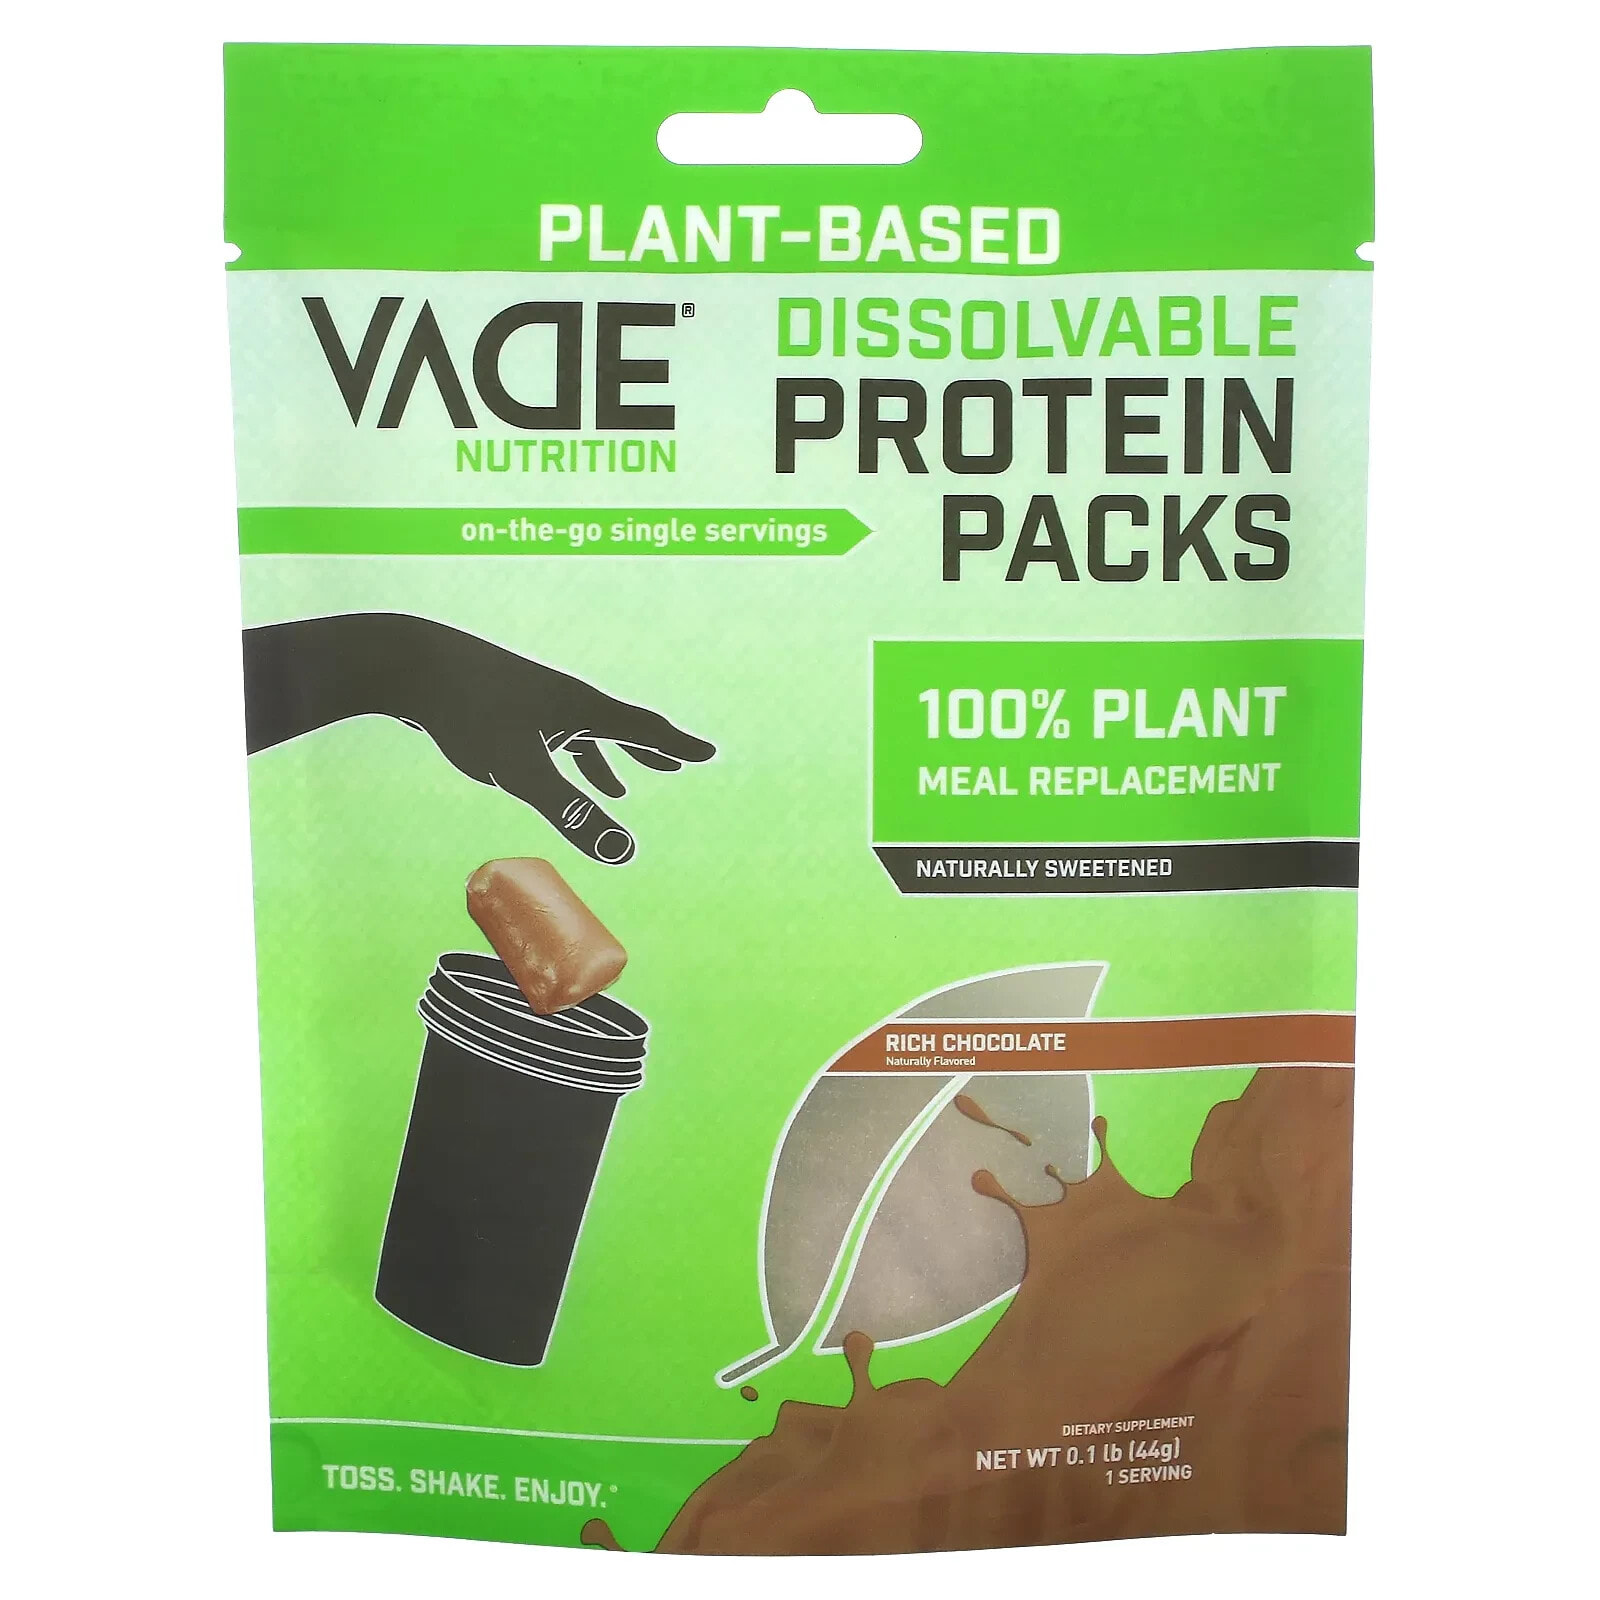 Vade Nutrition, Plant-Based Dissolvable Protein Packs, Rich Chocolate, 0.1 lb (44 g)